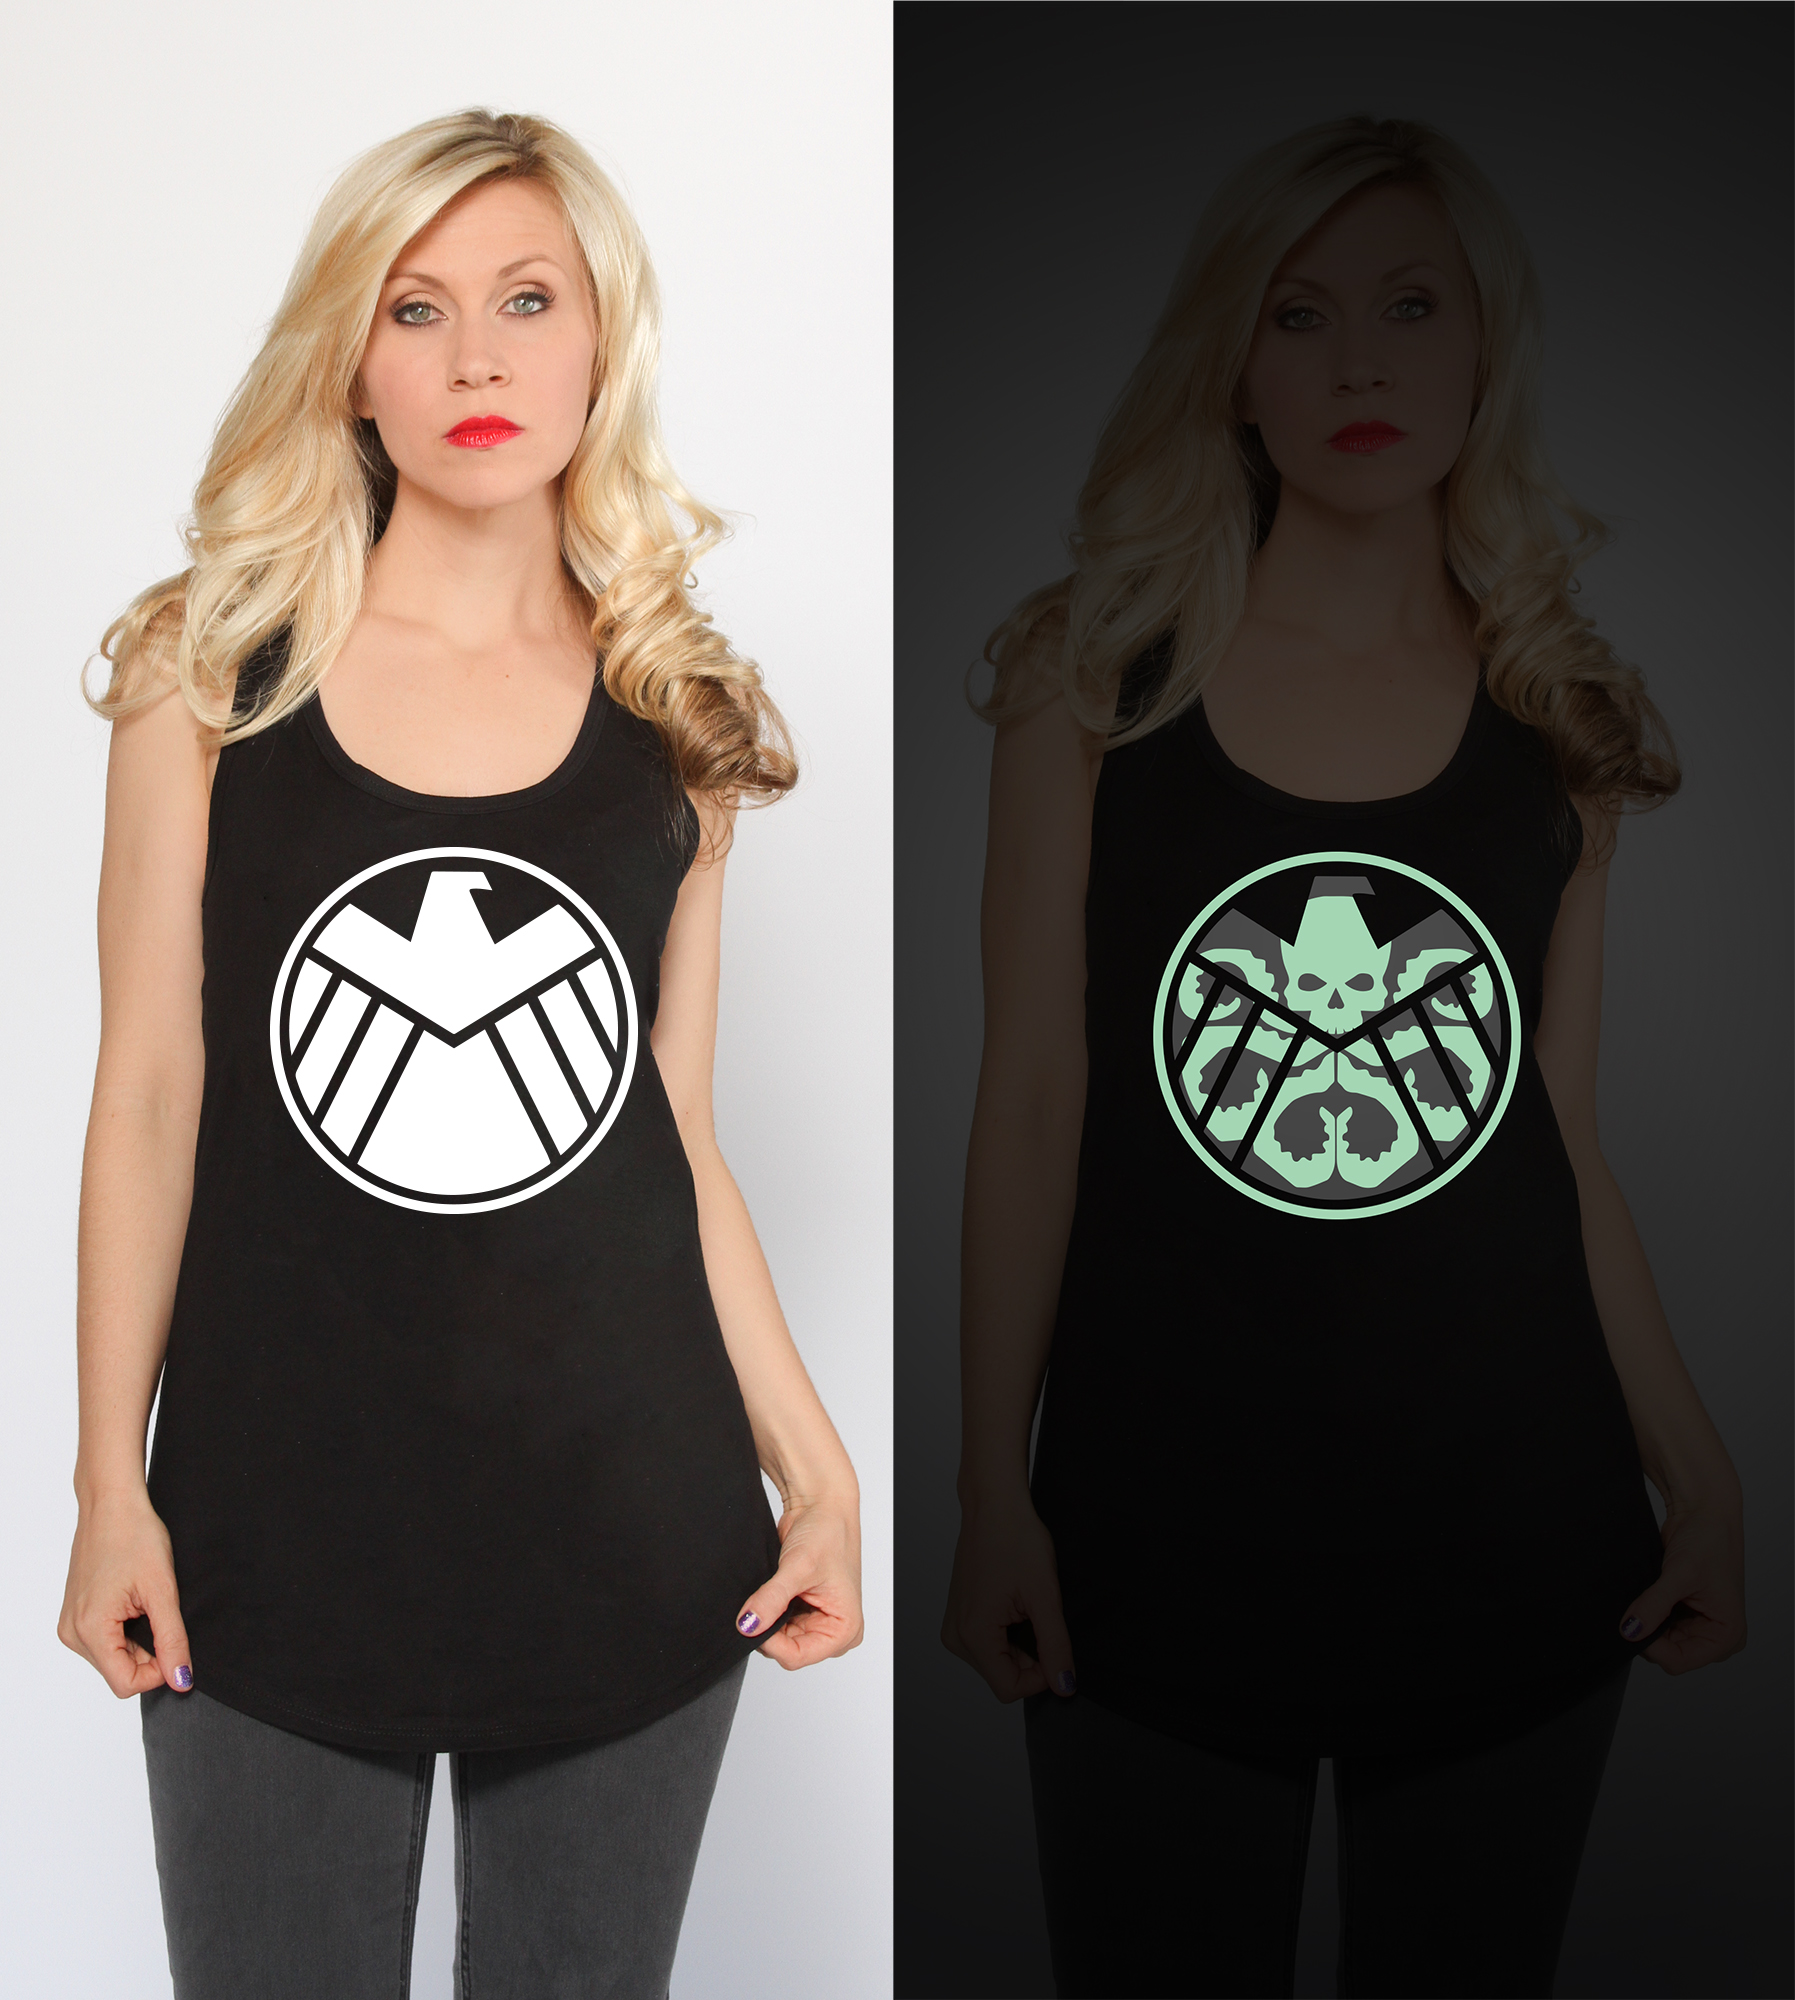 In the light you are a member of SHIELD but in the dark show others that you Hail Hydra!